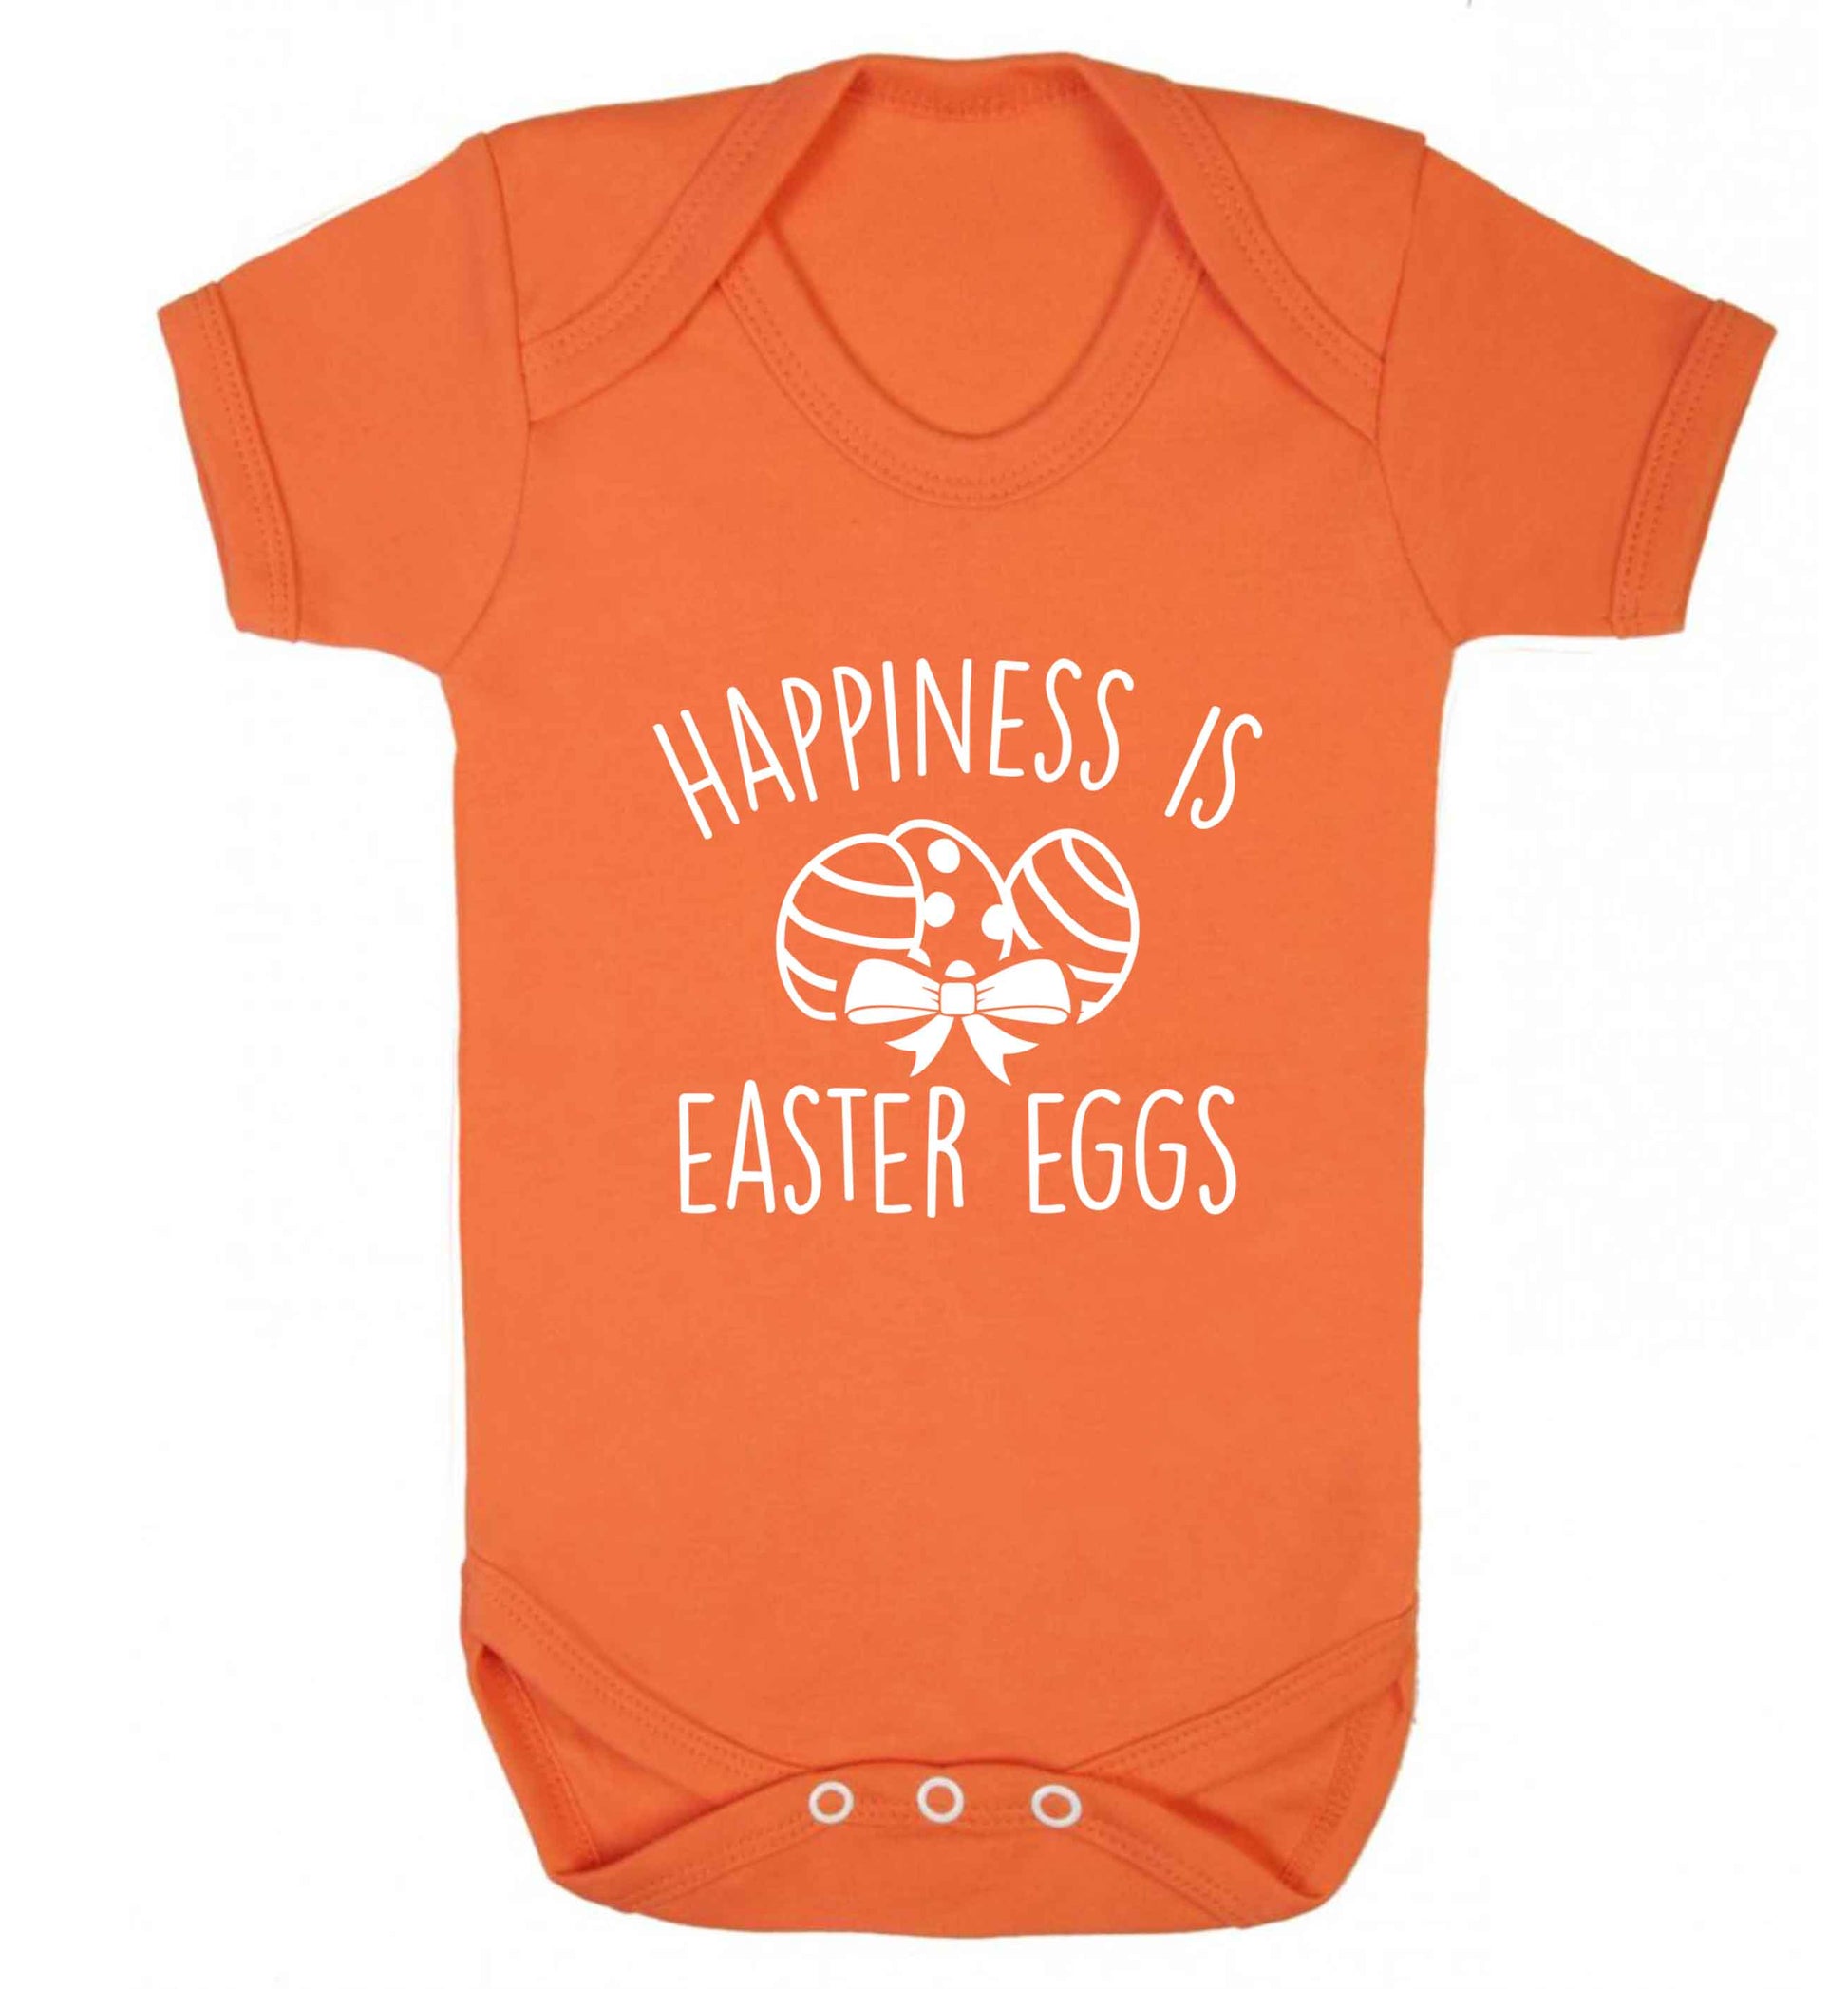 Happiness is Easter eggs baby vest orange 18-24 months